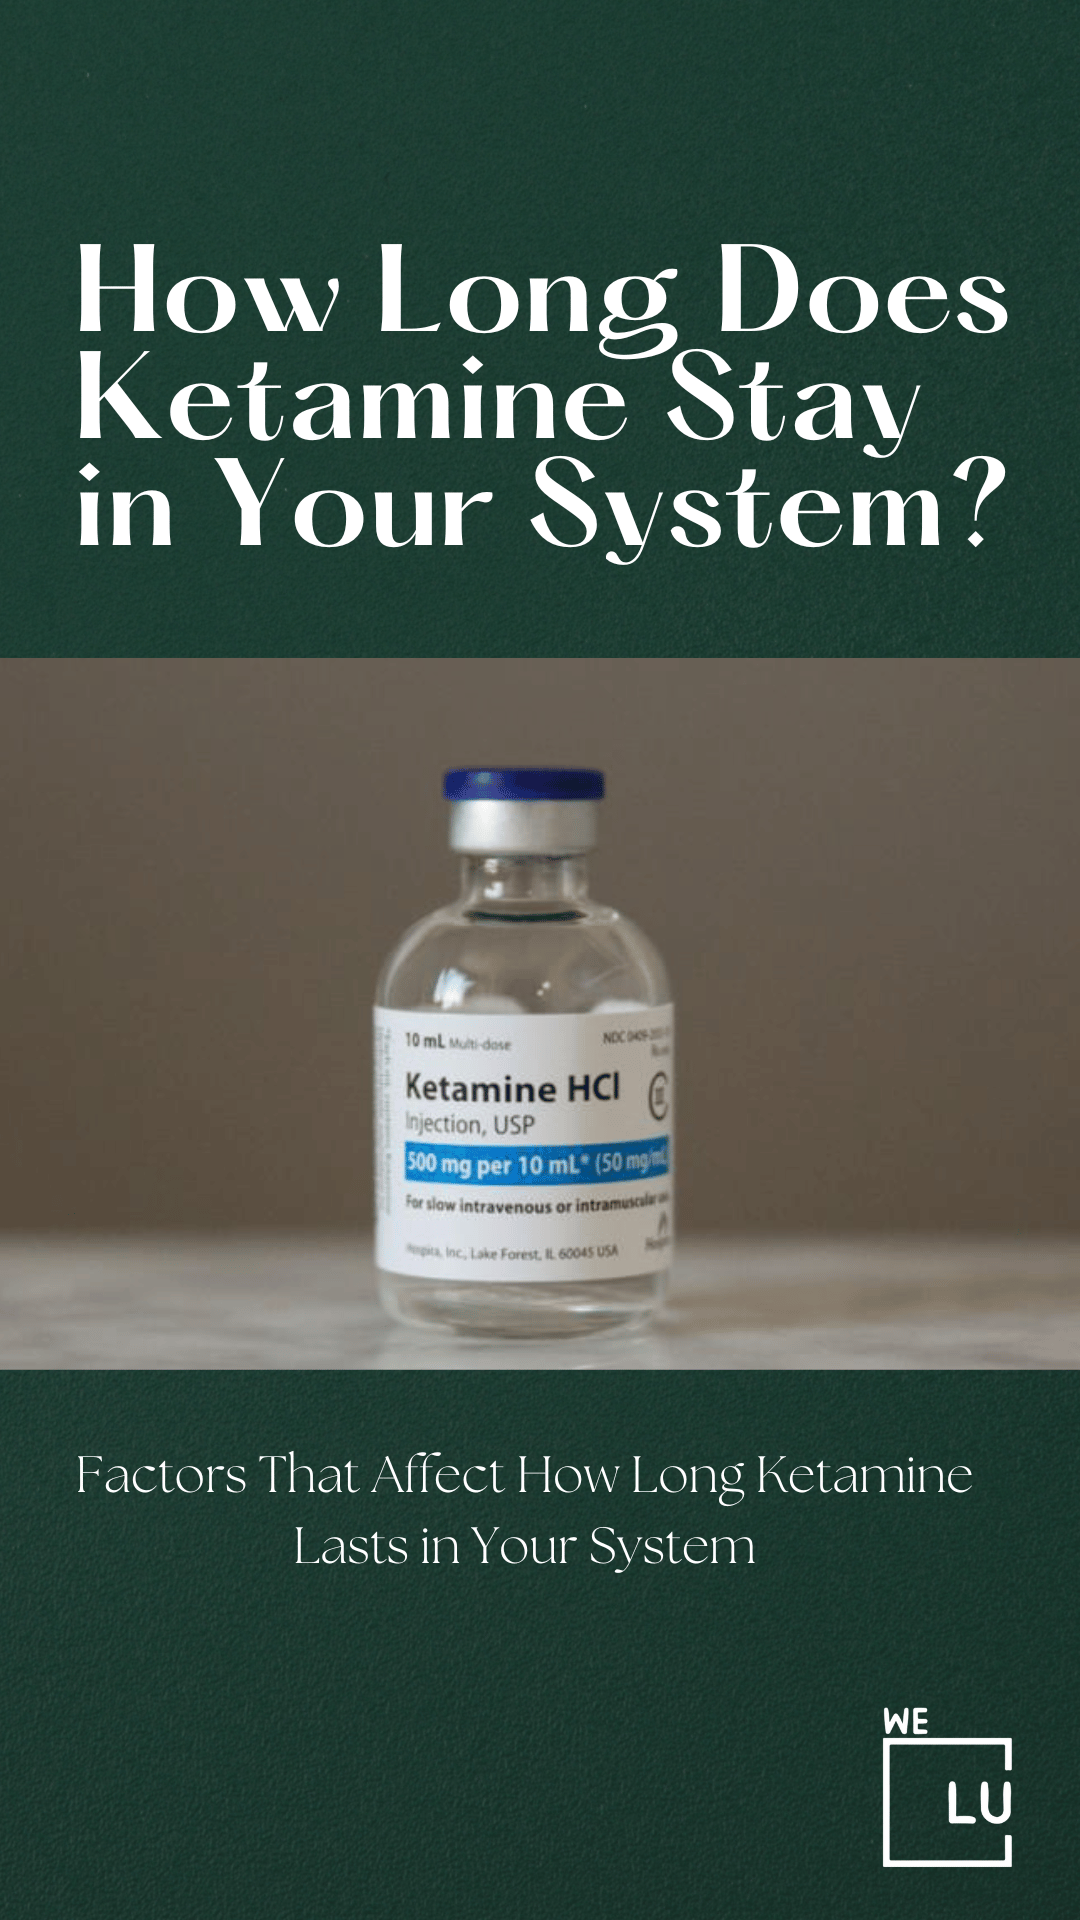 Ketamine For Anxiety Guide. Therapy With Ketamines For Anxiety. Research About Ketamine Therapy For Anxiety. Ketamine Treatment For Anxiety & How Fast Does Ketamine Work For Anxiety?